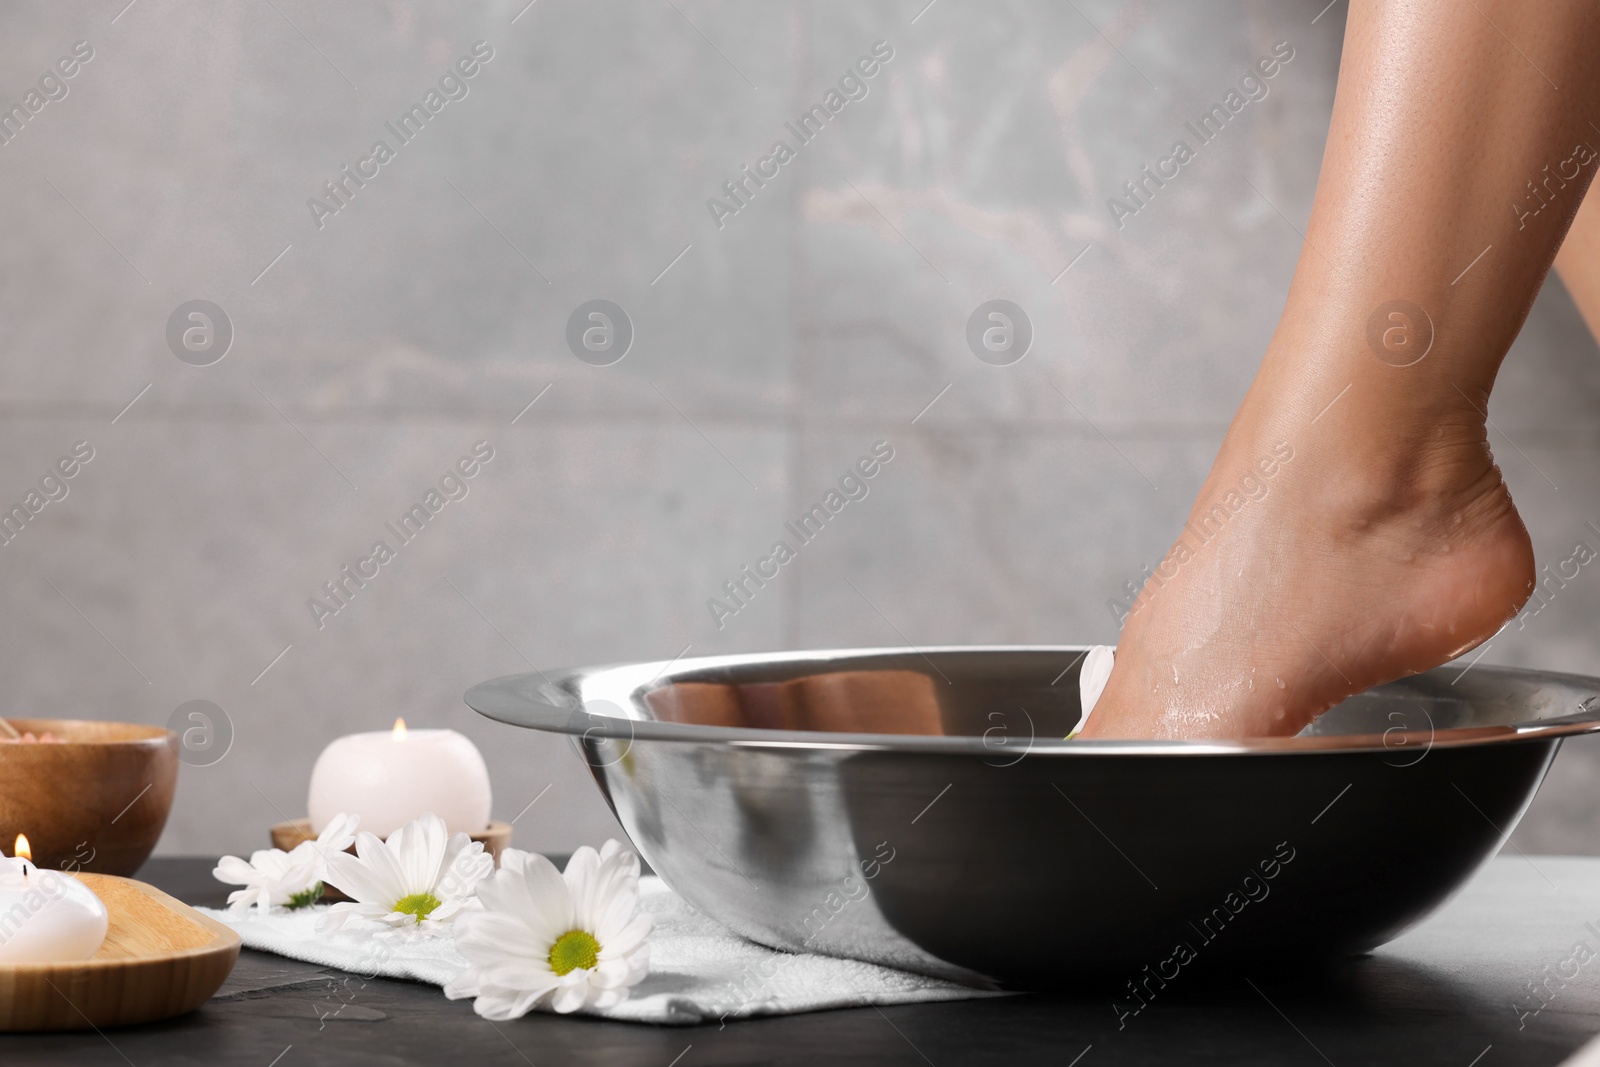 Photo of Woman soaking her foot in bowl with water on dark surface, closeup. Pedicure procedure